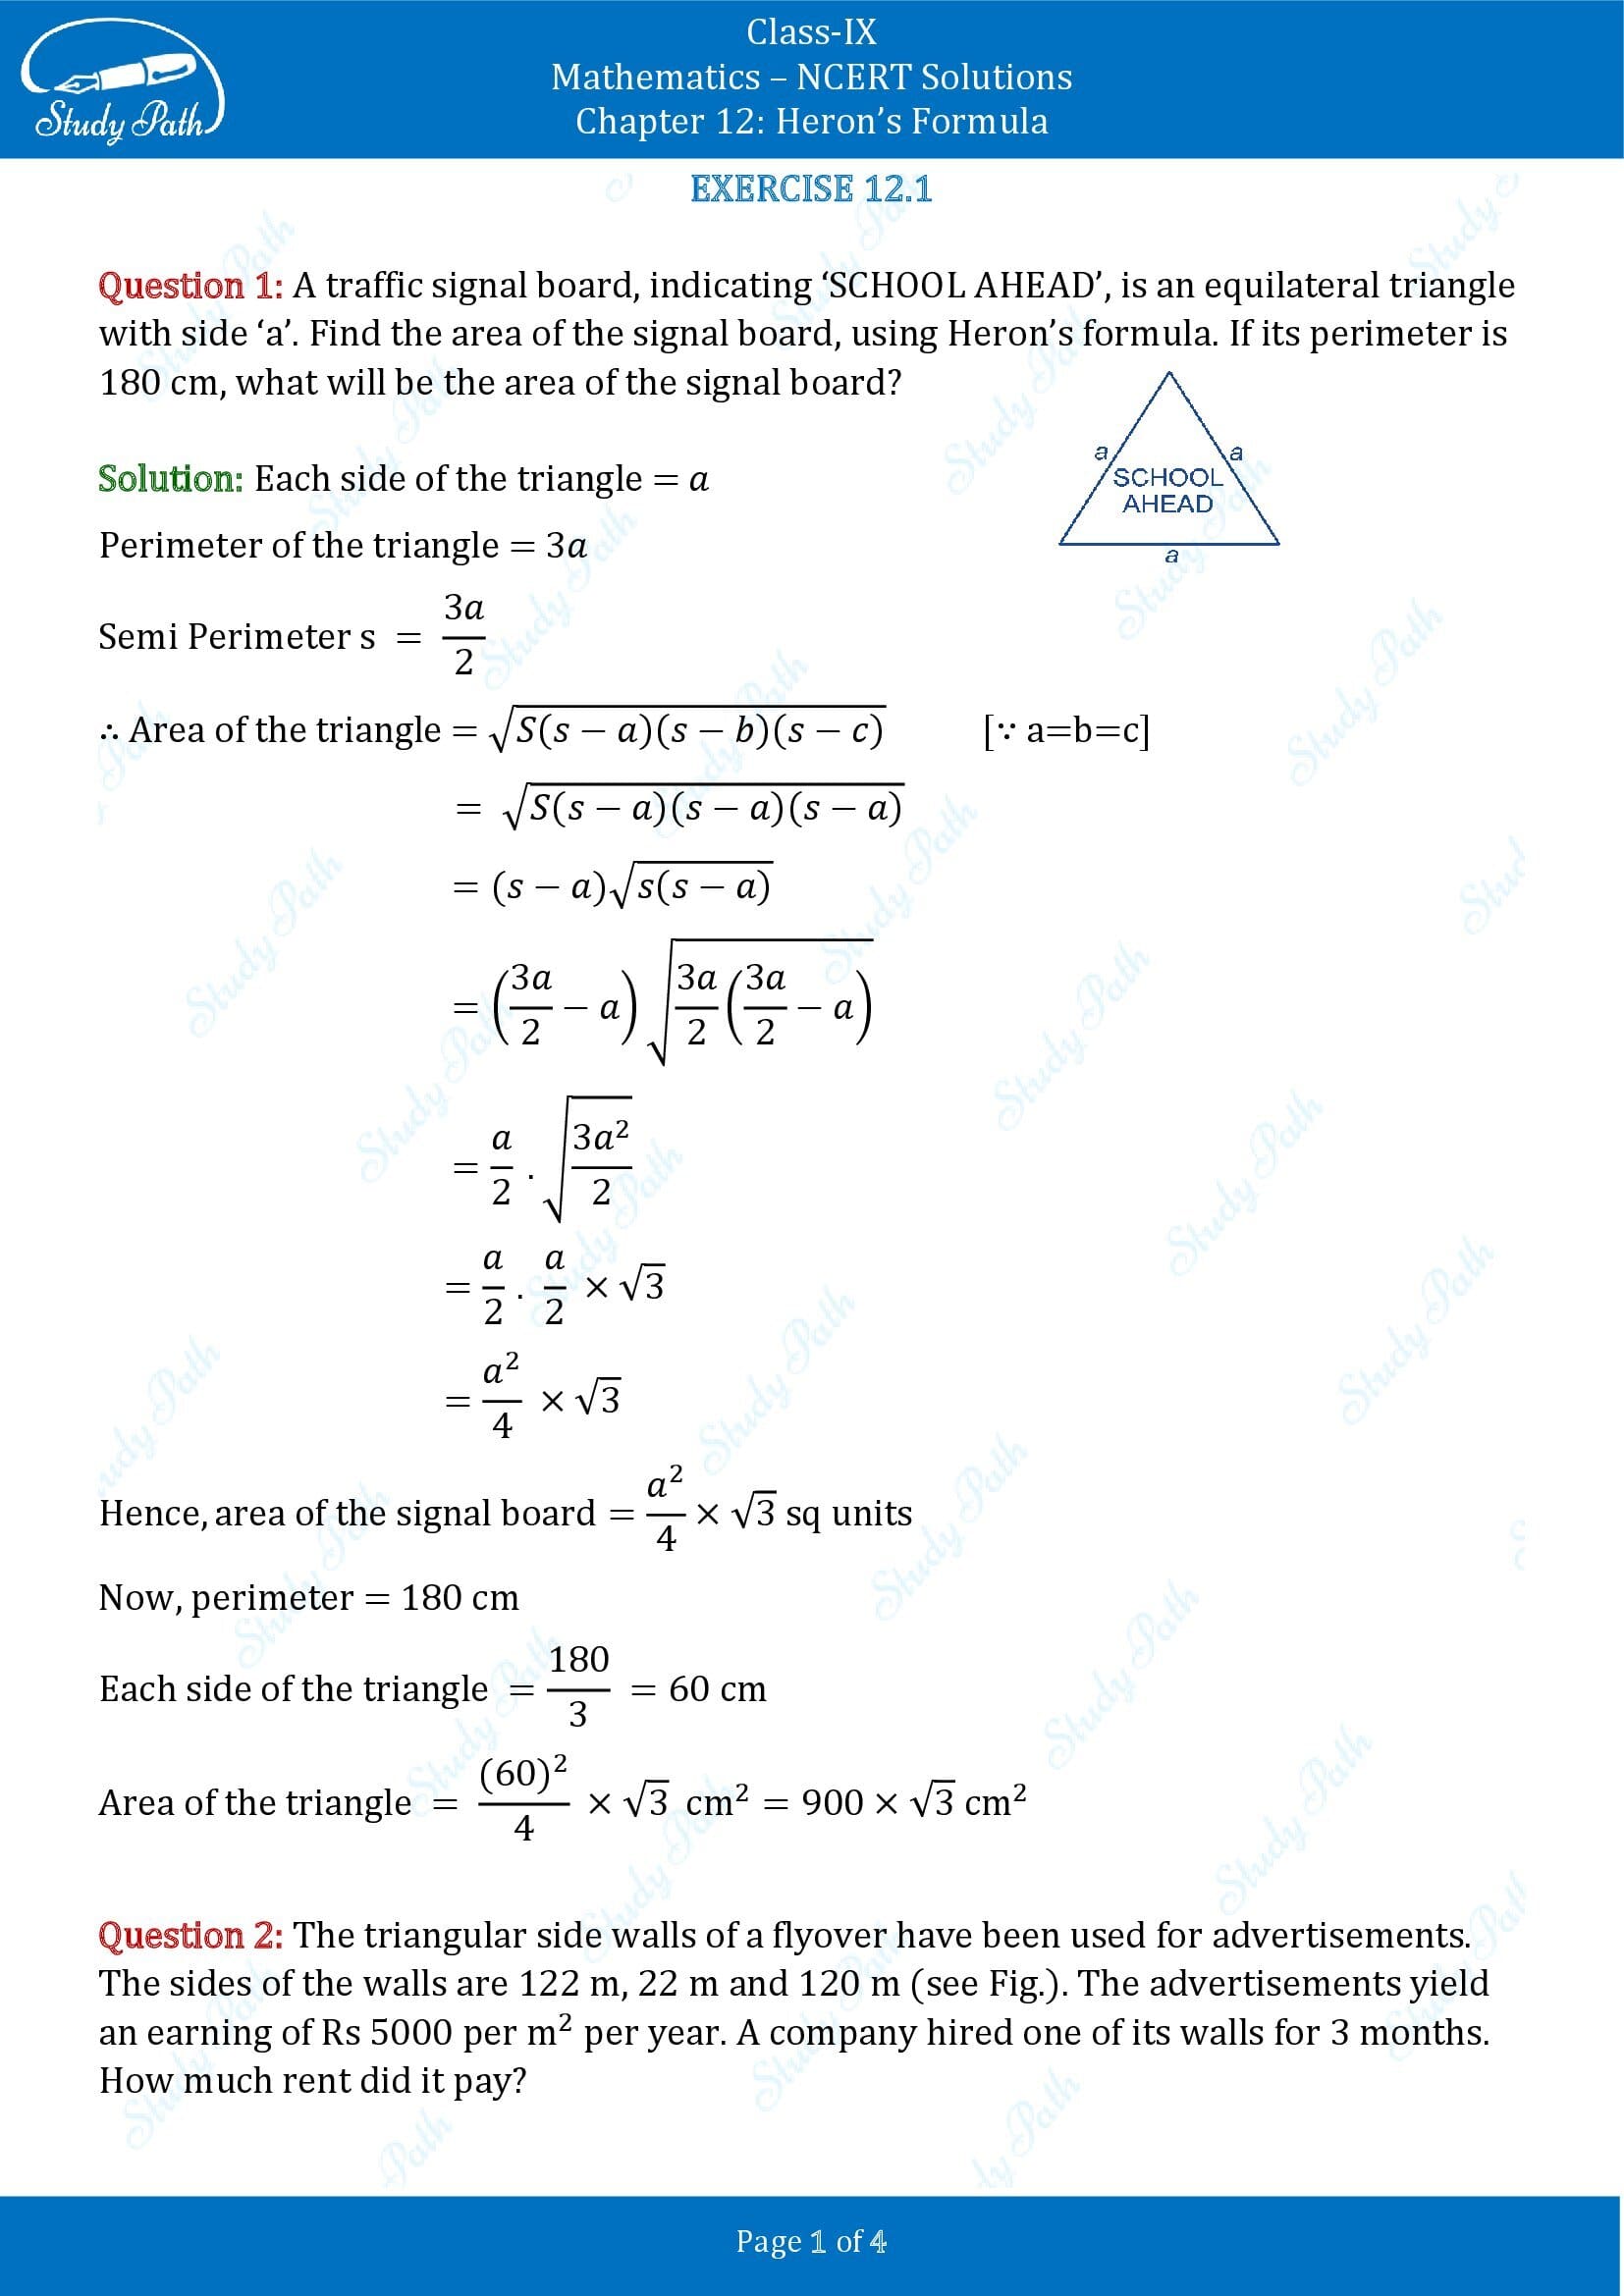 NCERT Solutions for Class 9 Maths Chapter 12 Herons Formula Exercise 12.1 00001